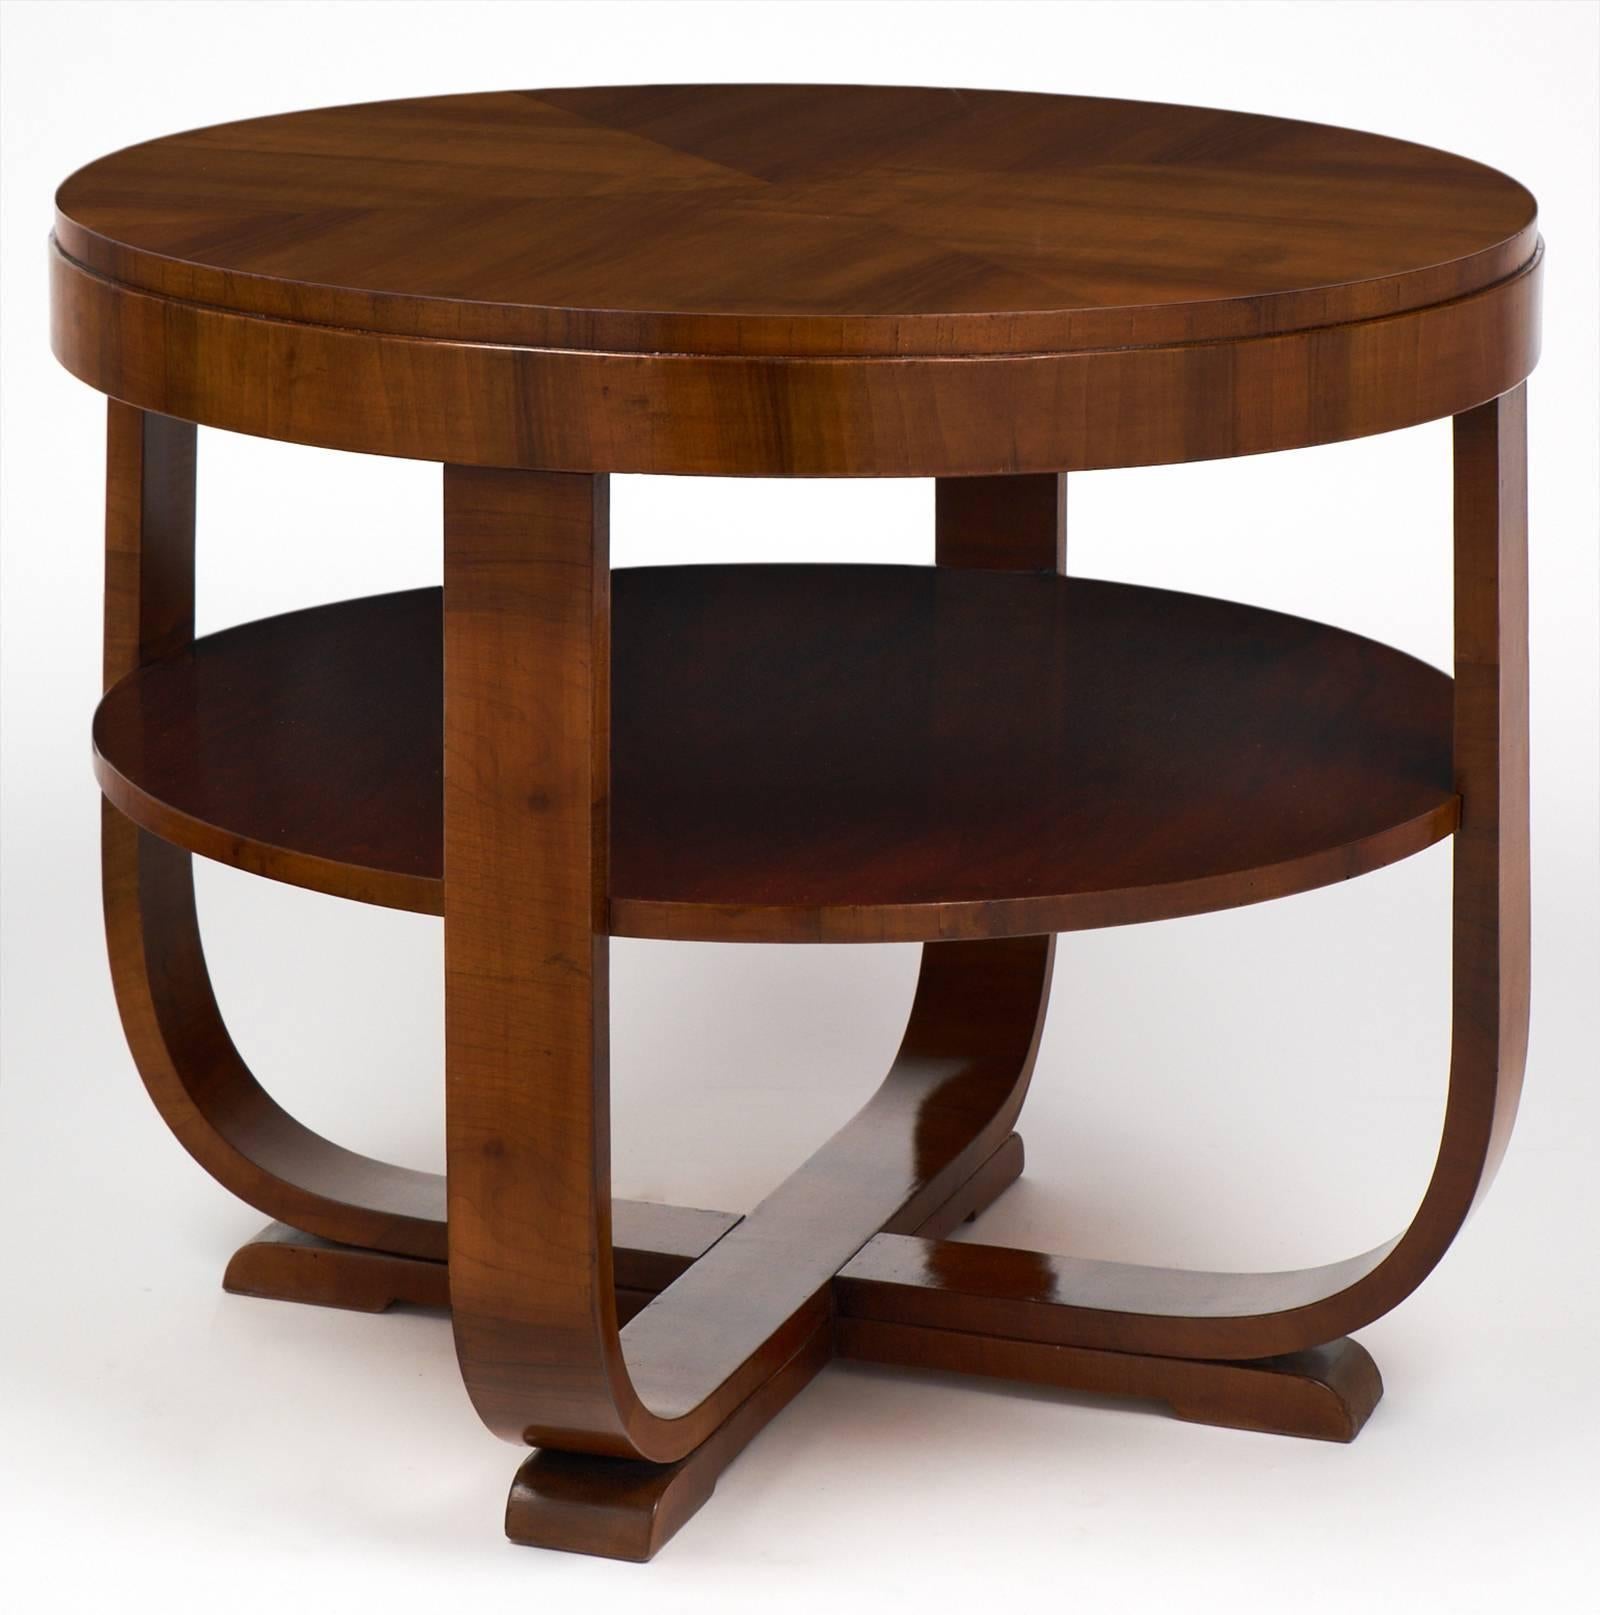 Wonderful Biedermeier Austrian Art Deco gueridon from a hotel in Vienna, circa 1940. This lovely table has four legs, a shelf, and a walnut veneer parquetry top. The finish is a lustrous French polish. We love the deep luster of the piece and the